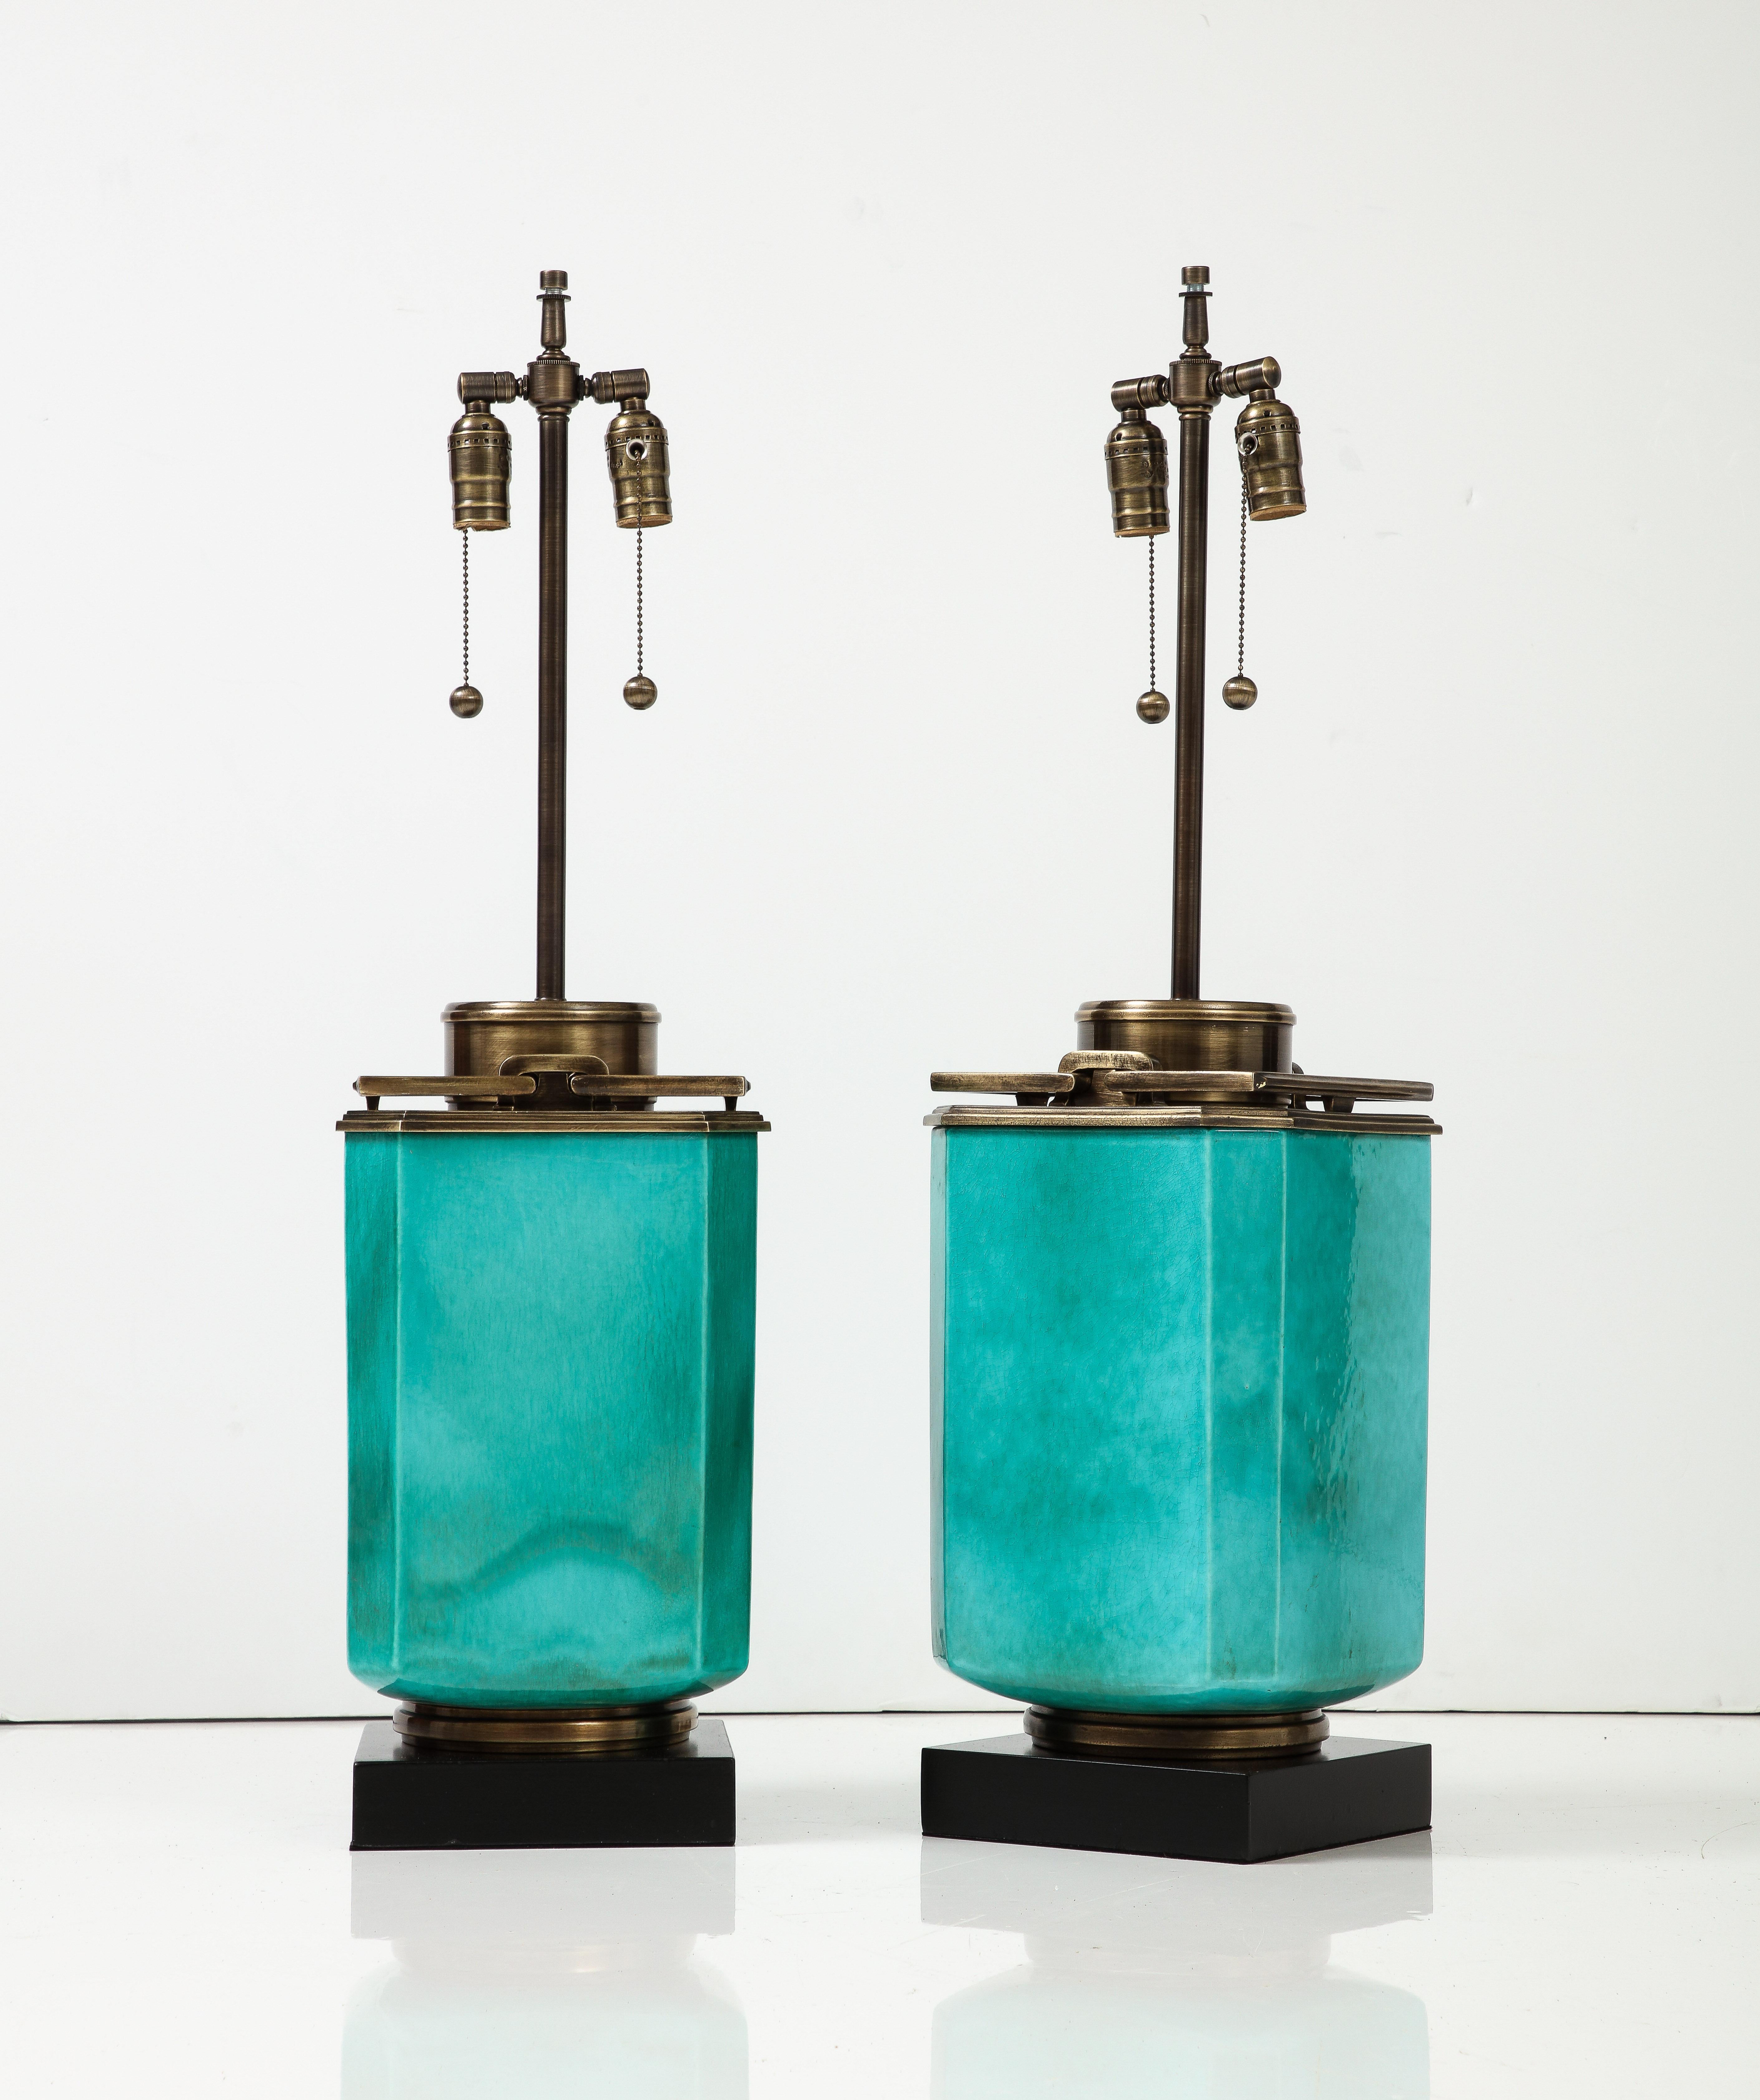 Impressive large scale Jade green porcelain lantern lamps featuring aged brass hardware. Lamps have been rewired for use in USA using edison type bulbs, 75W max bulbs. Lamps sit upon black enameled square wood bases.